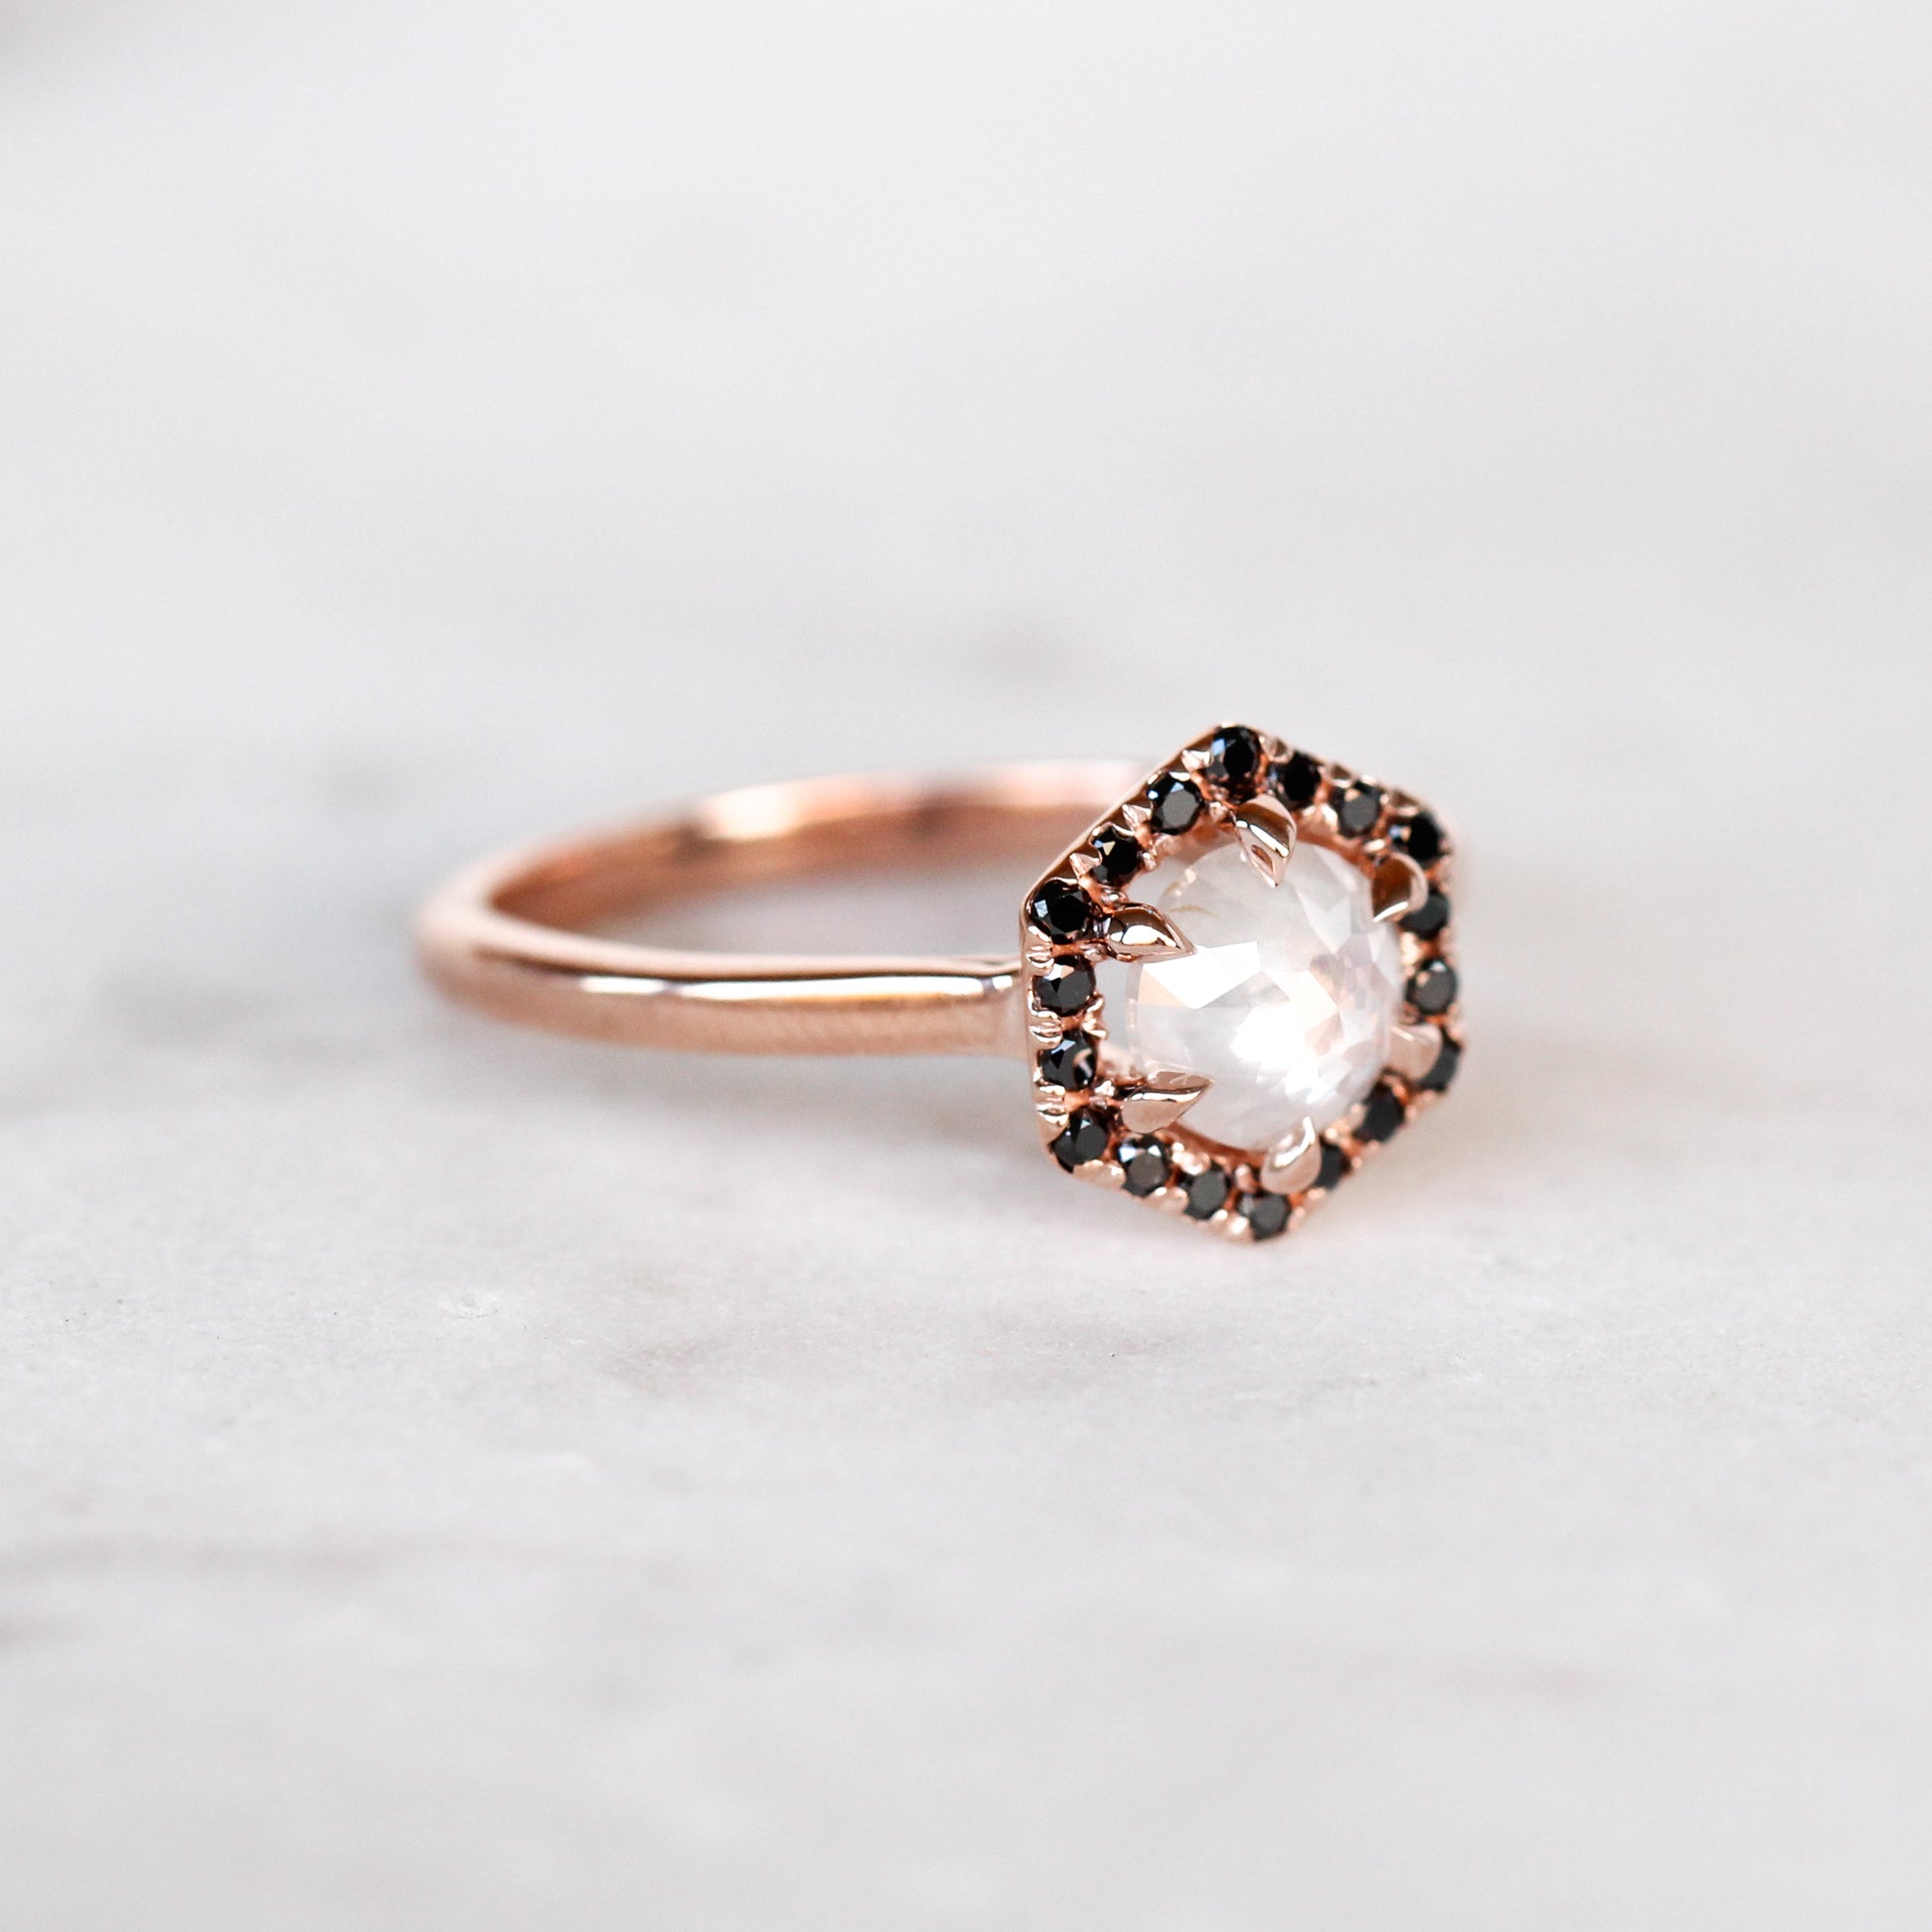 Sia Ring with a 0.90 Carat Misty White Round Rose Cut Diamond and Black Accent Diamonds in 10k Rose Gold - Ready to Size and Ship - Midwinter Co. Alternative Bridal Rings and Modern Fine Jewelry